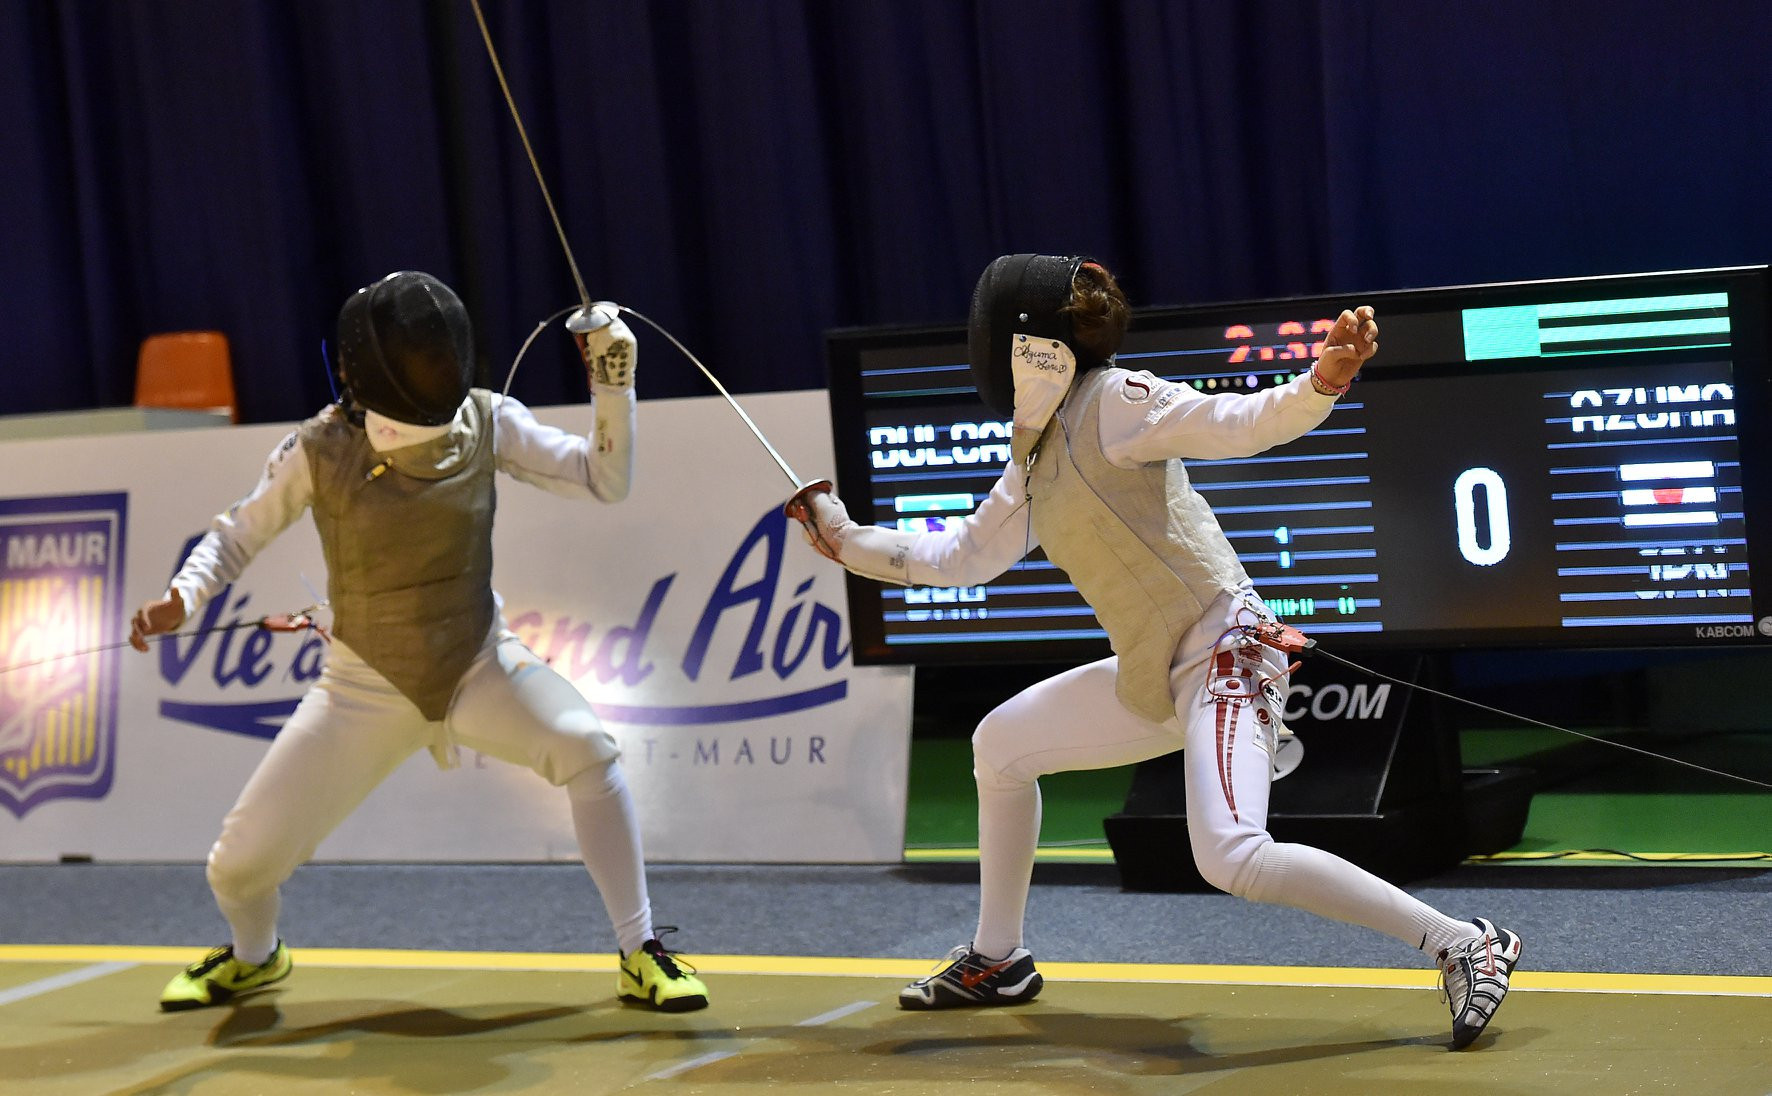 Competition also got underway at the FIE Women's Foil World Cup in St-Maur in France ©Facebook